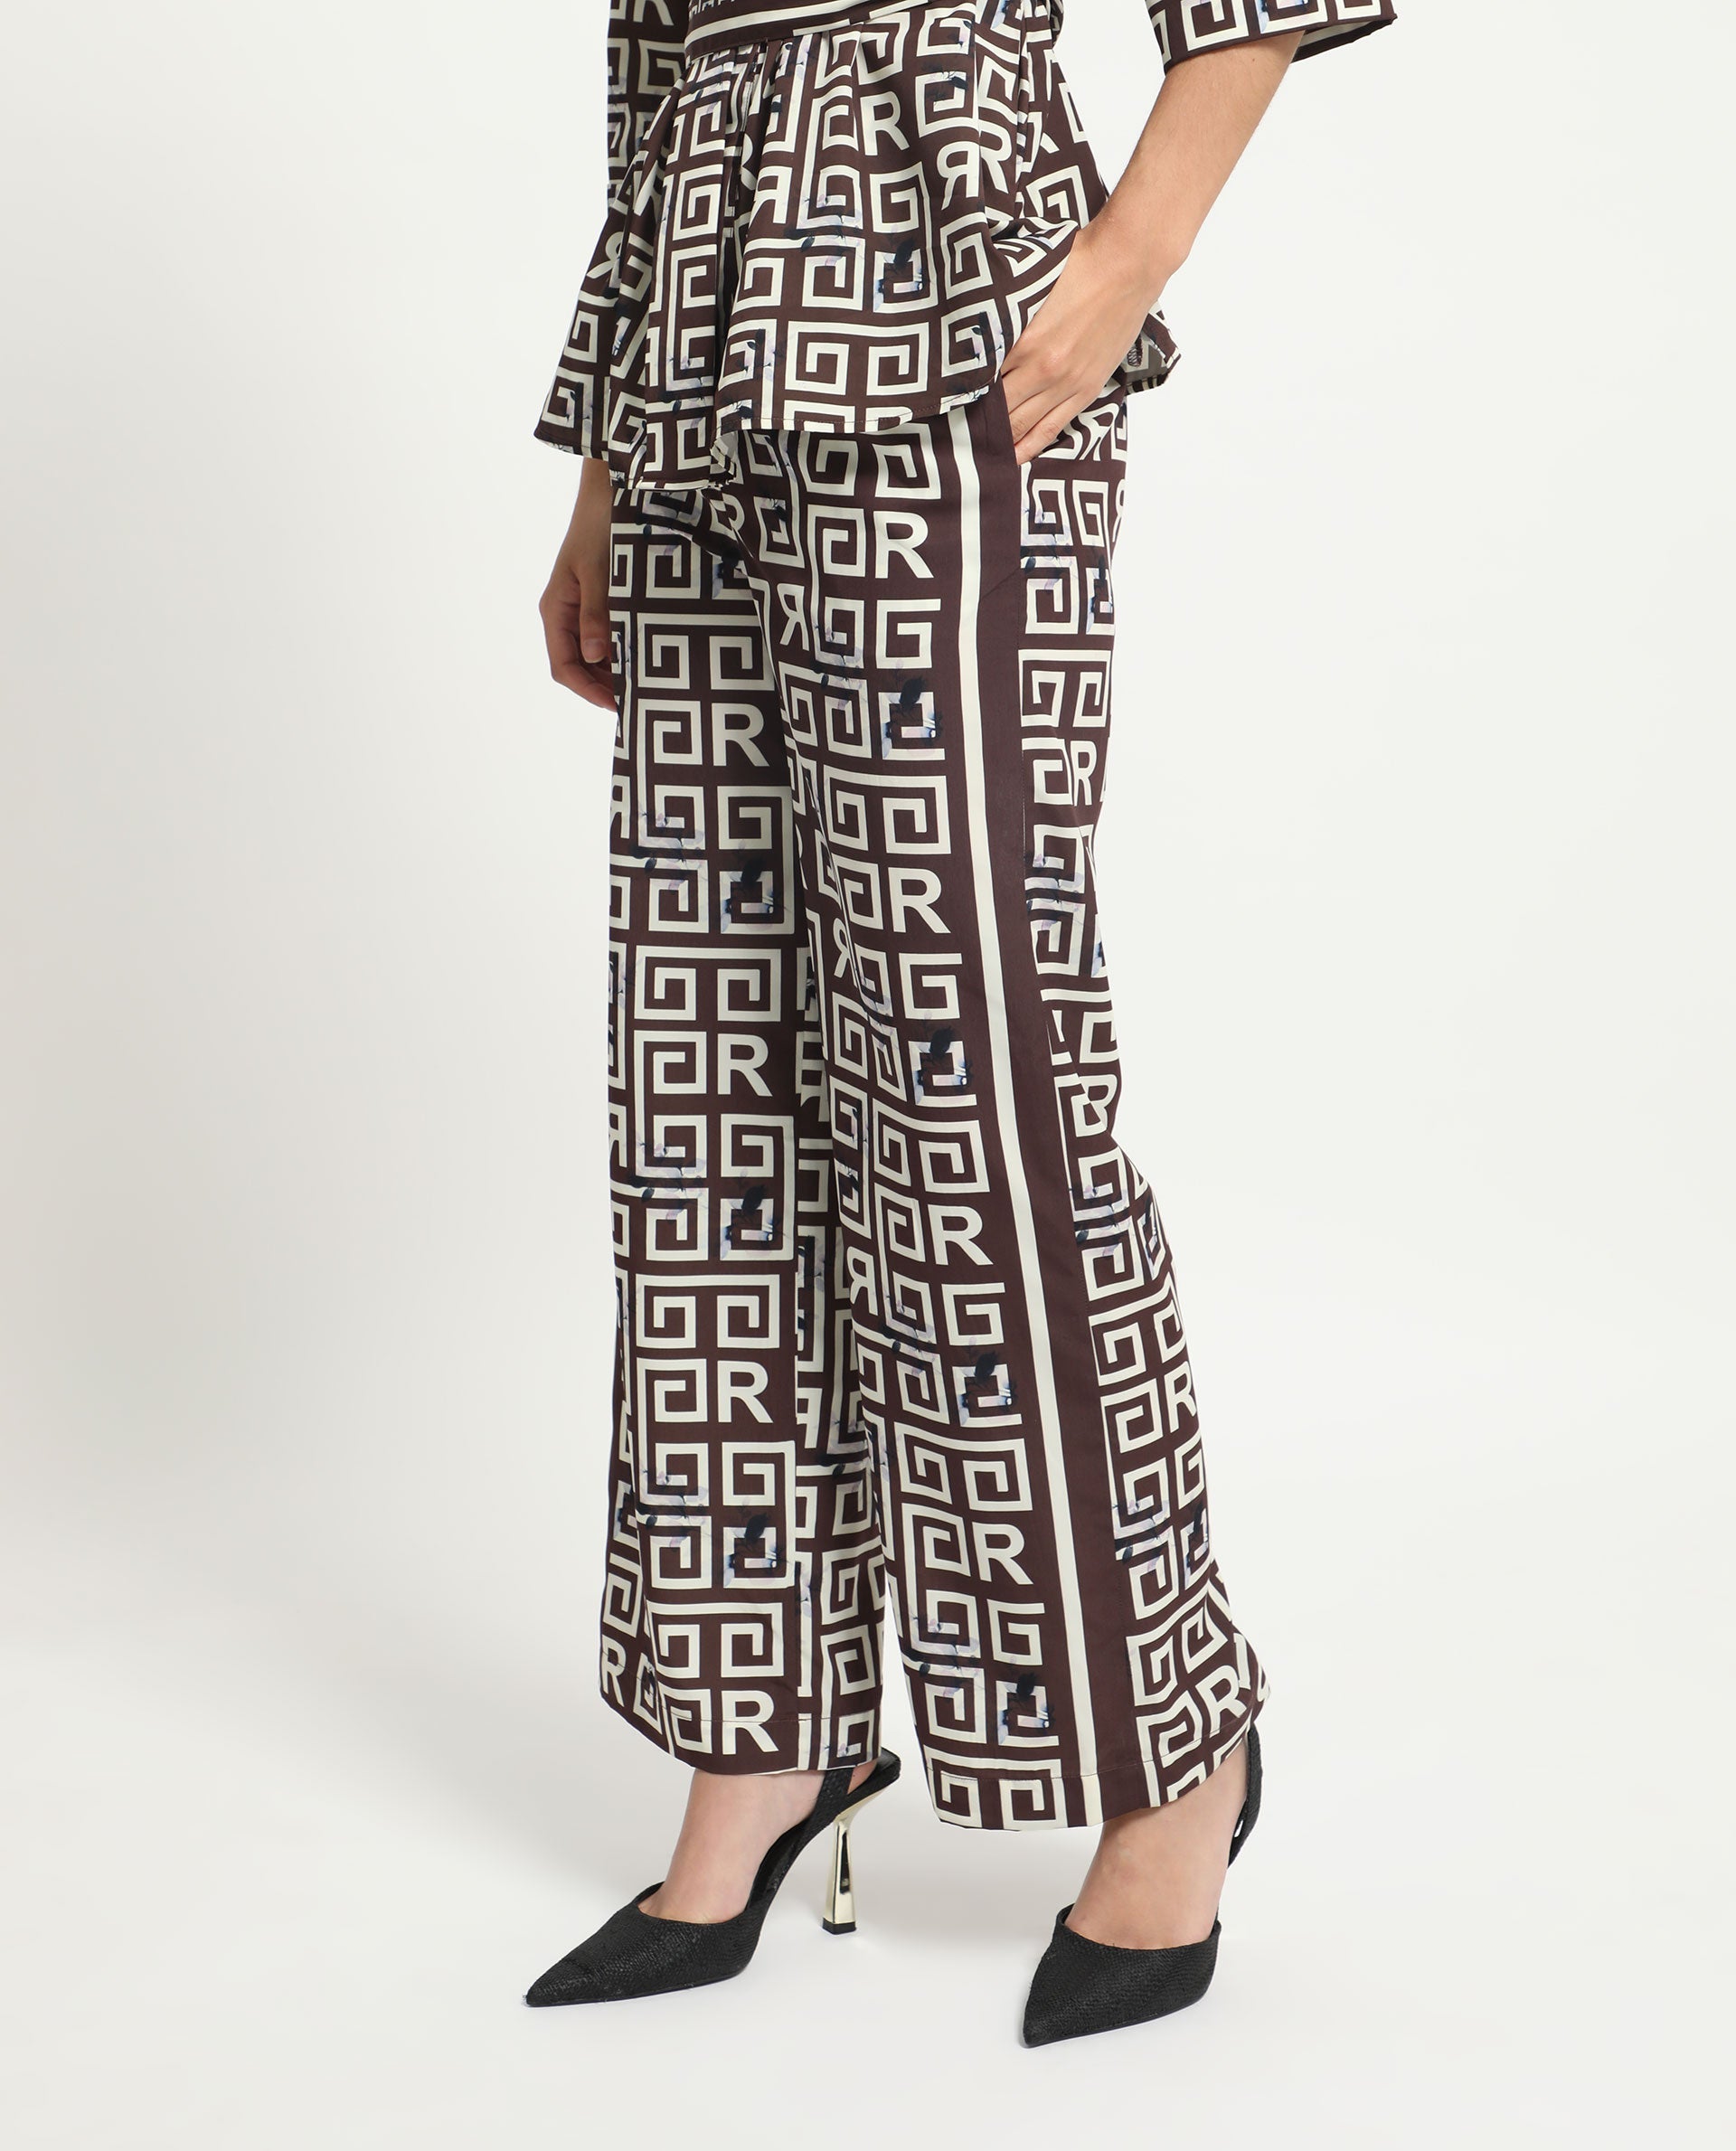 WOMEN'S WOOD BROWN TROUSER POLYESTER FABRIC PRINTED